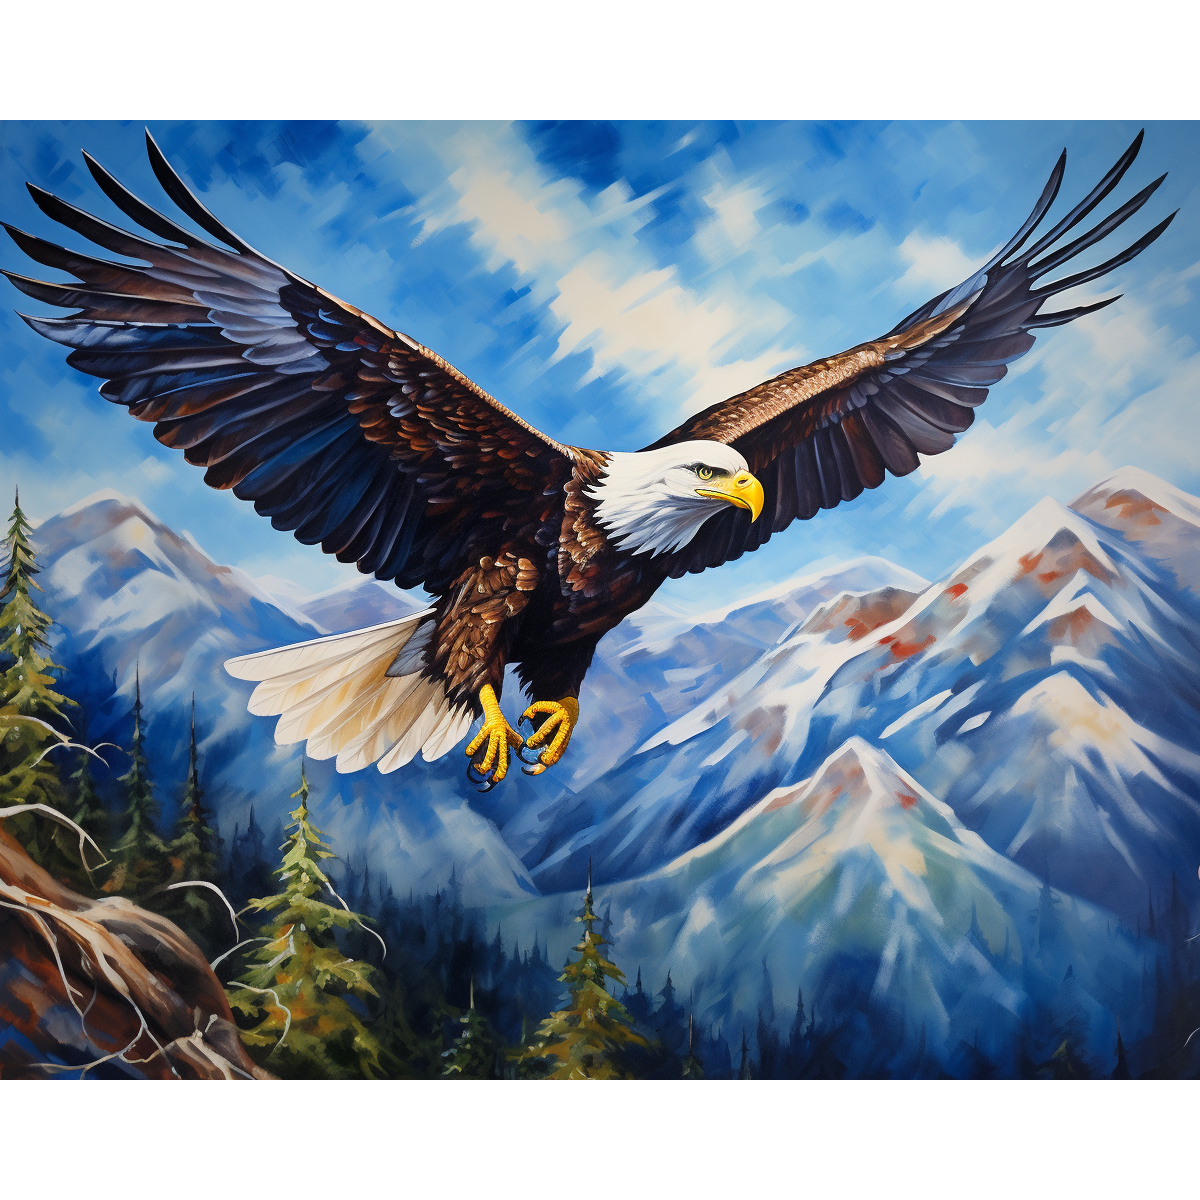 Bald Eagle Painting by Number Painting Kit by Numbers Acrylic Painting  Canvas for Adults Wall Art Decor Gift 